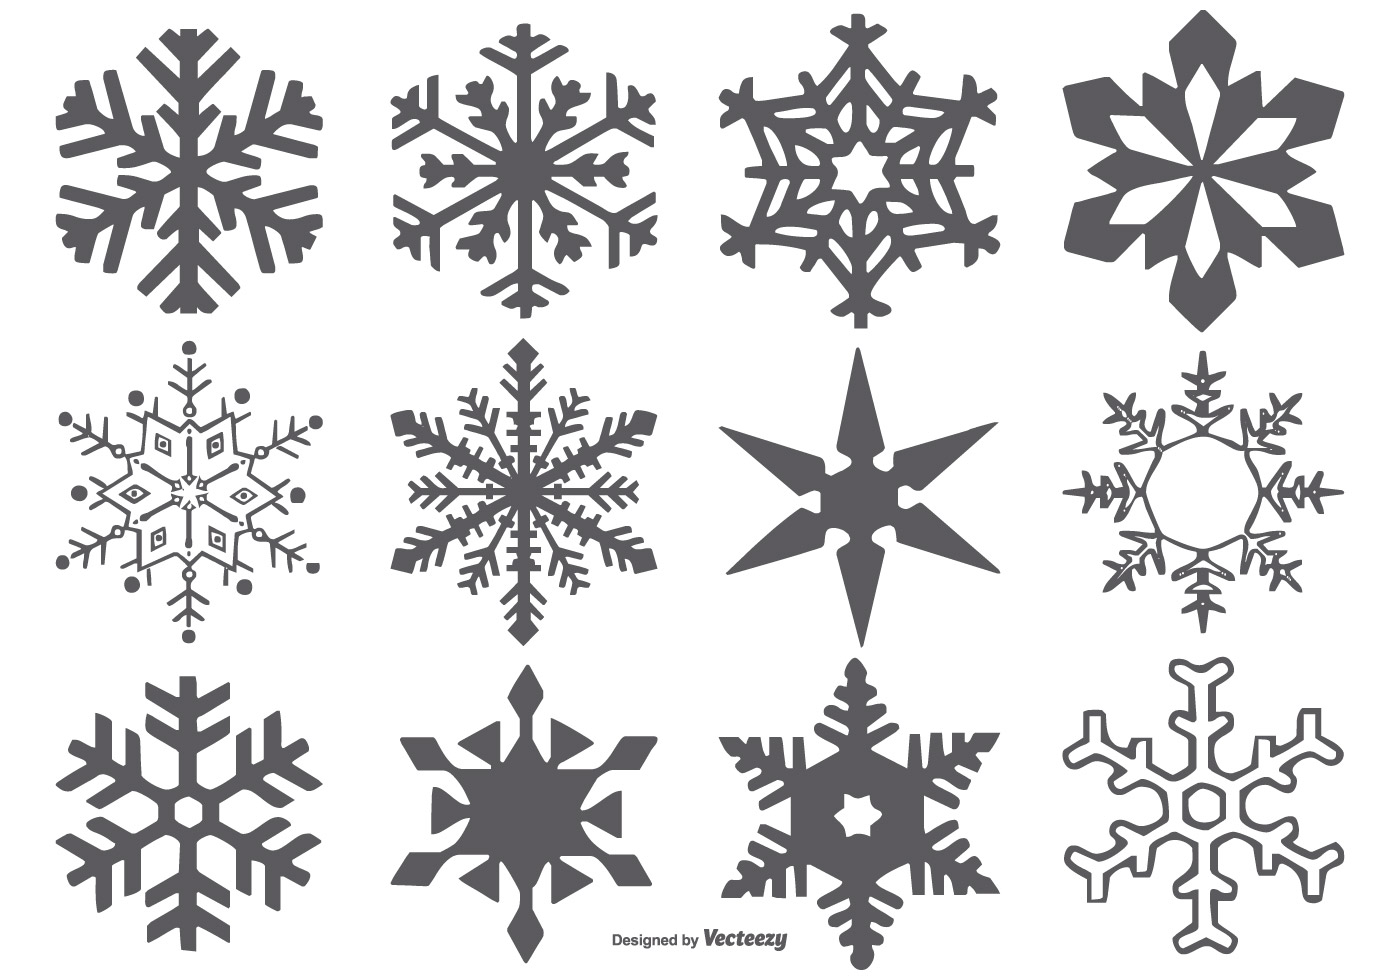 Download Vector Snowflake Shapes - Download Free Vector Art, Stock ...